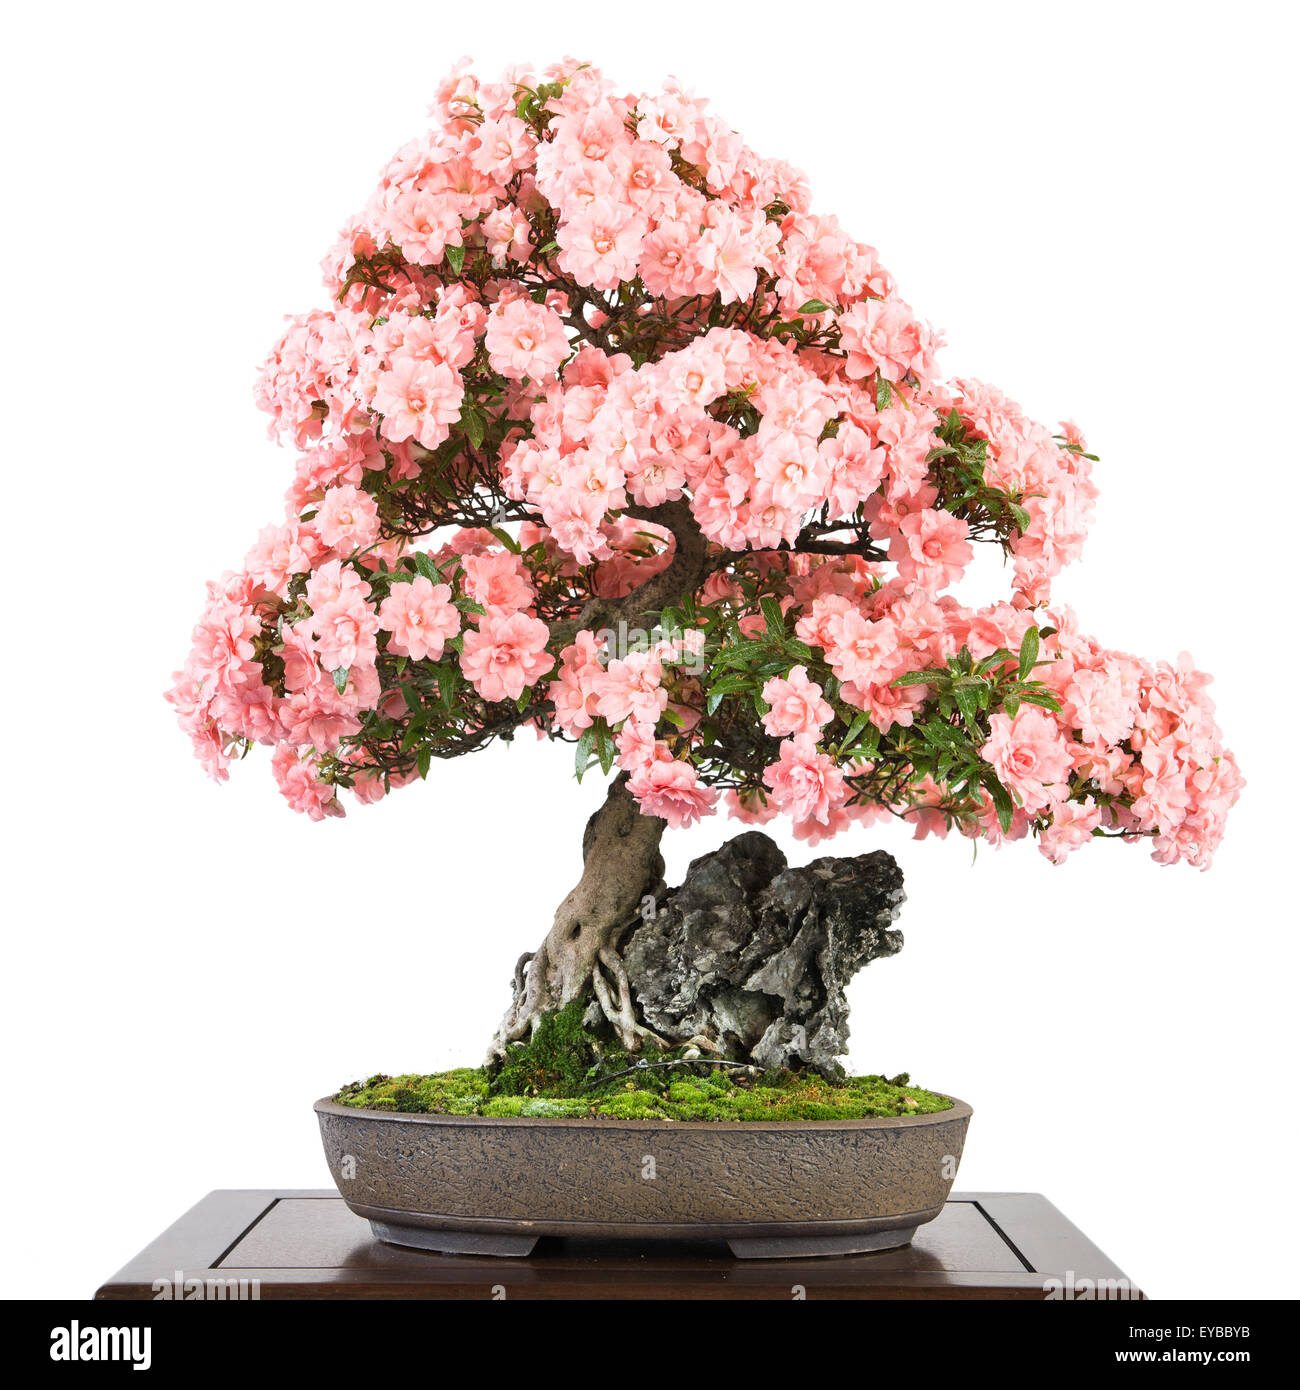 Azalea with pink flowers (Rhododendron indicum) as bonsai tree Stock Photo